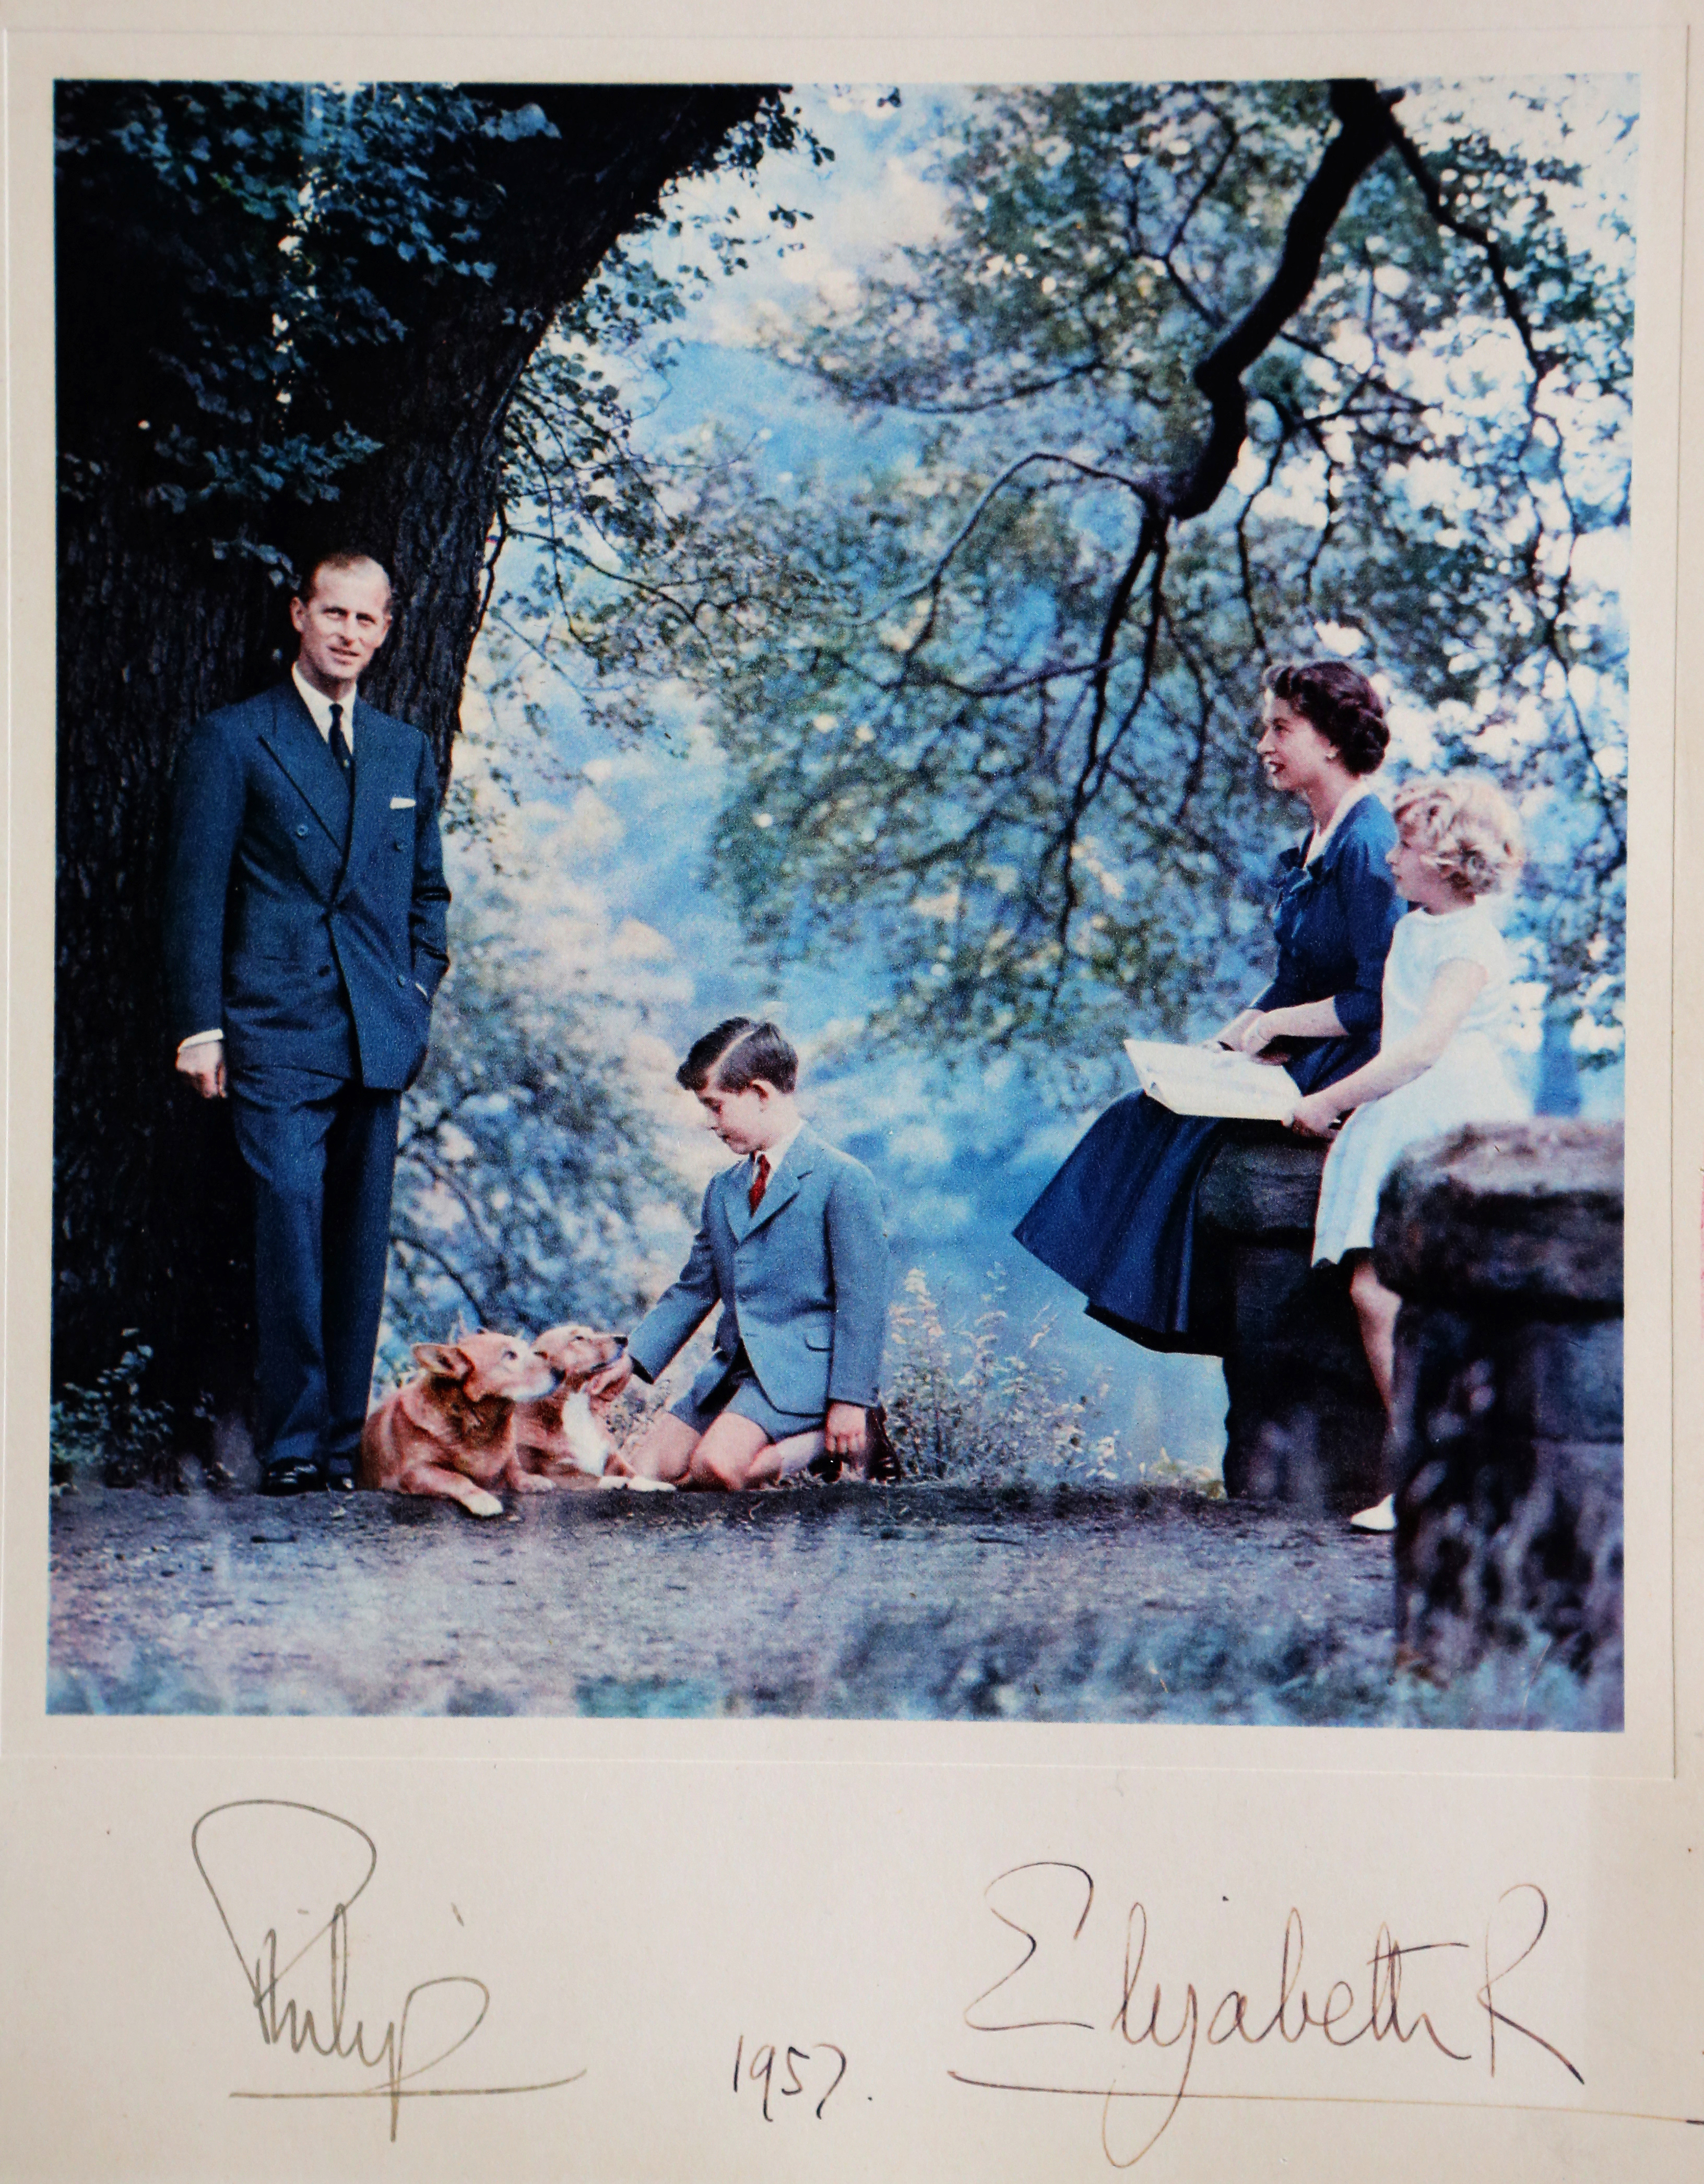 1957 Royal Christmas Card. Queen Elizabeth II and the Philip, Duke of Edinburgh with their children Prince Charles and Princess Anne.